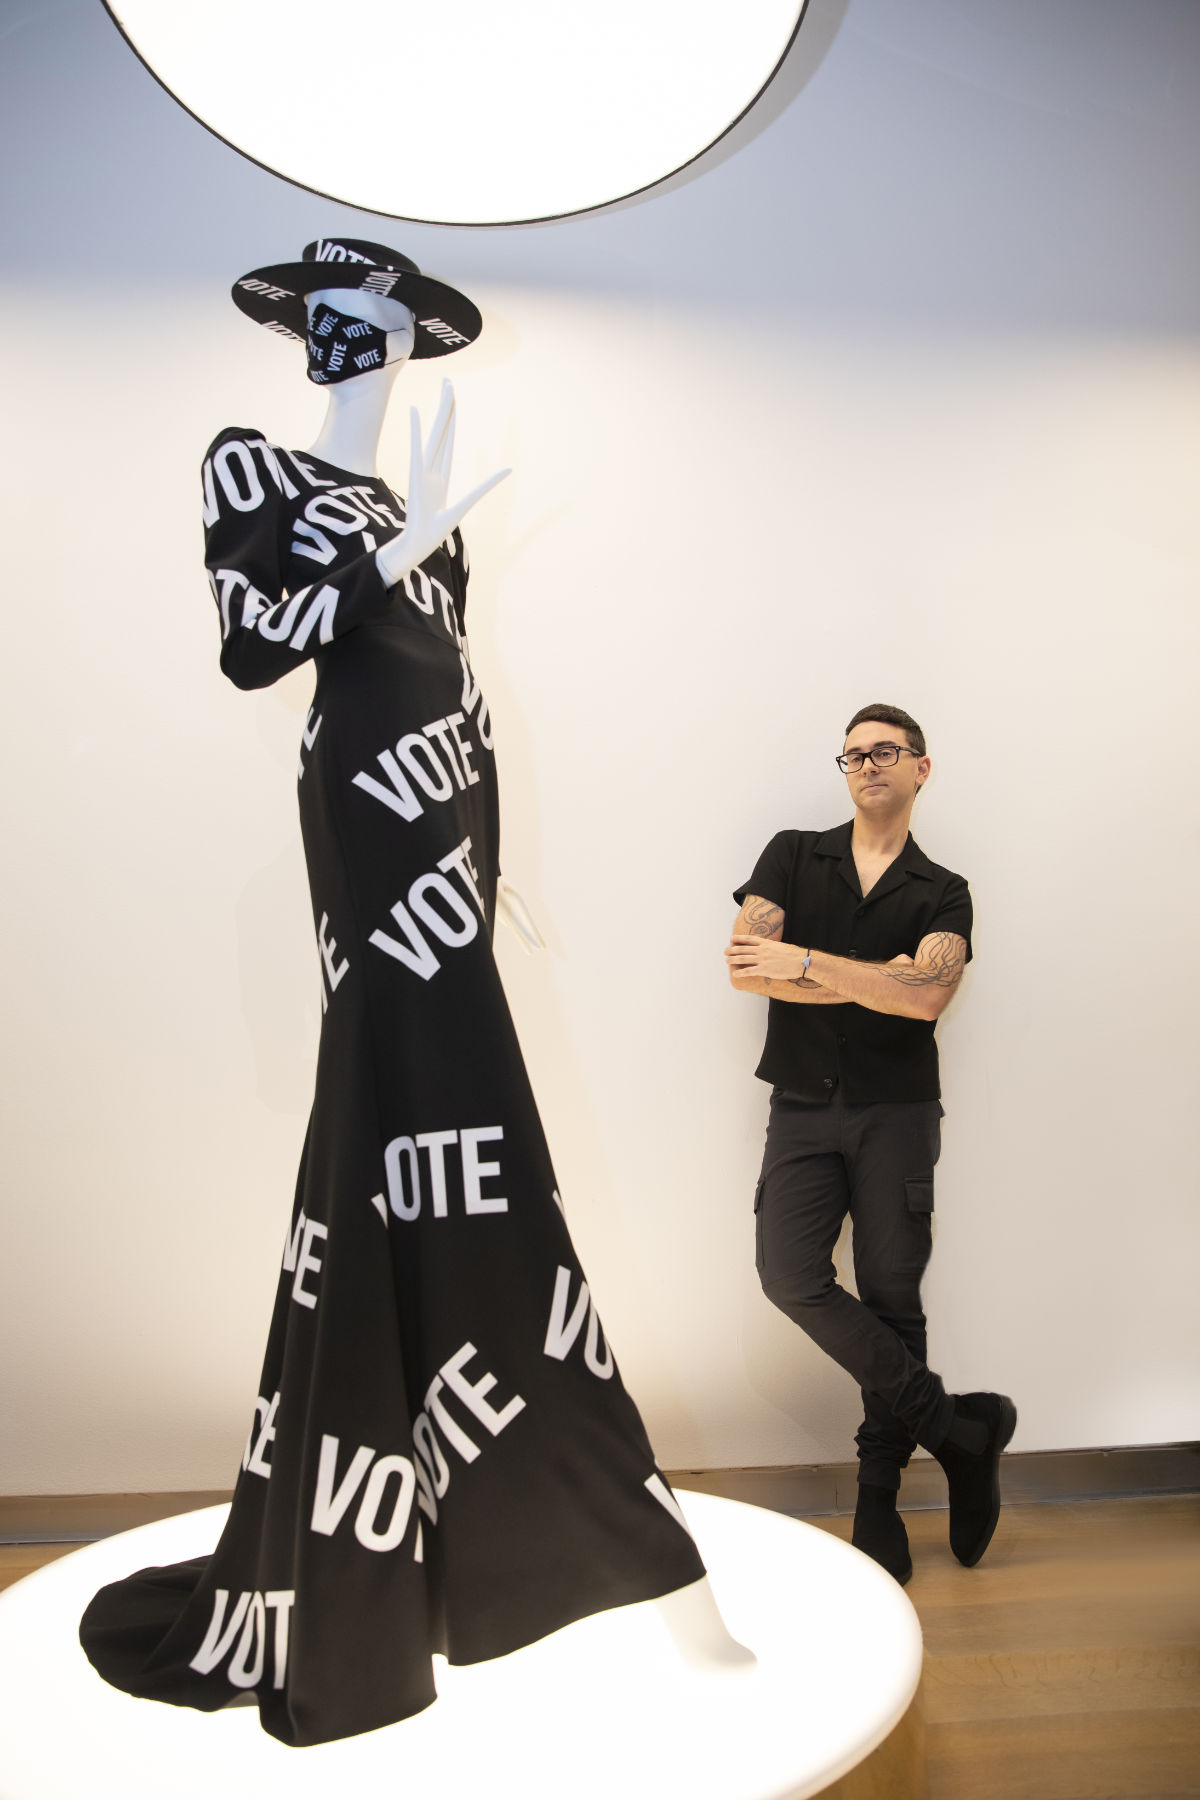 Scad Museum Of Art Presents Christian Siriano: People Are People Exhibition